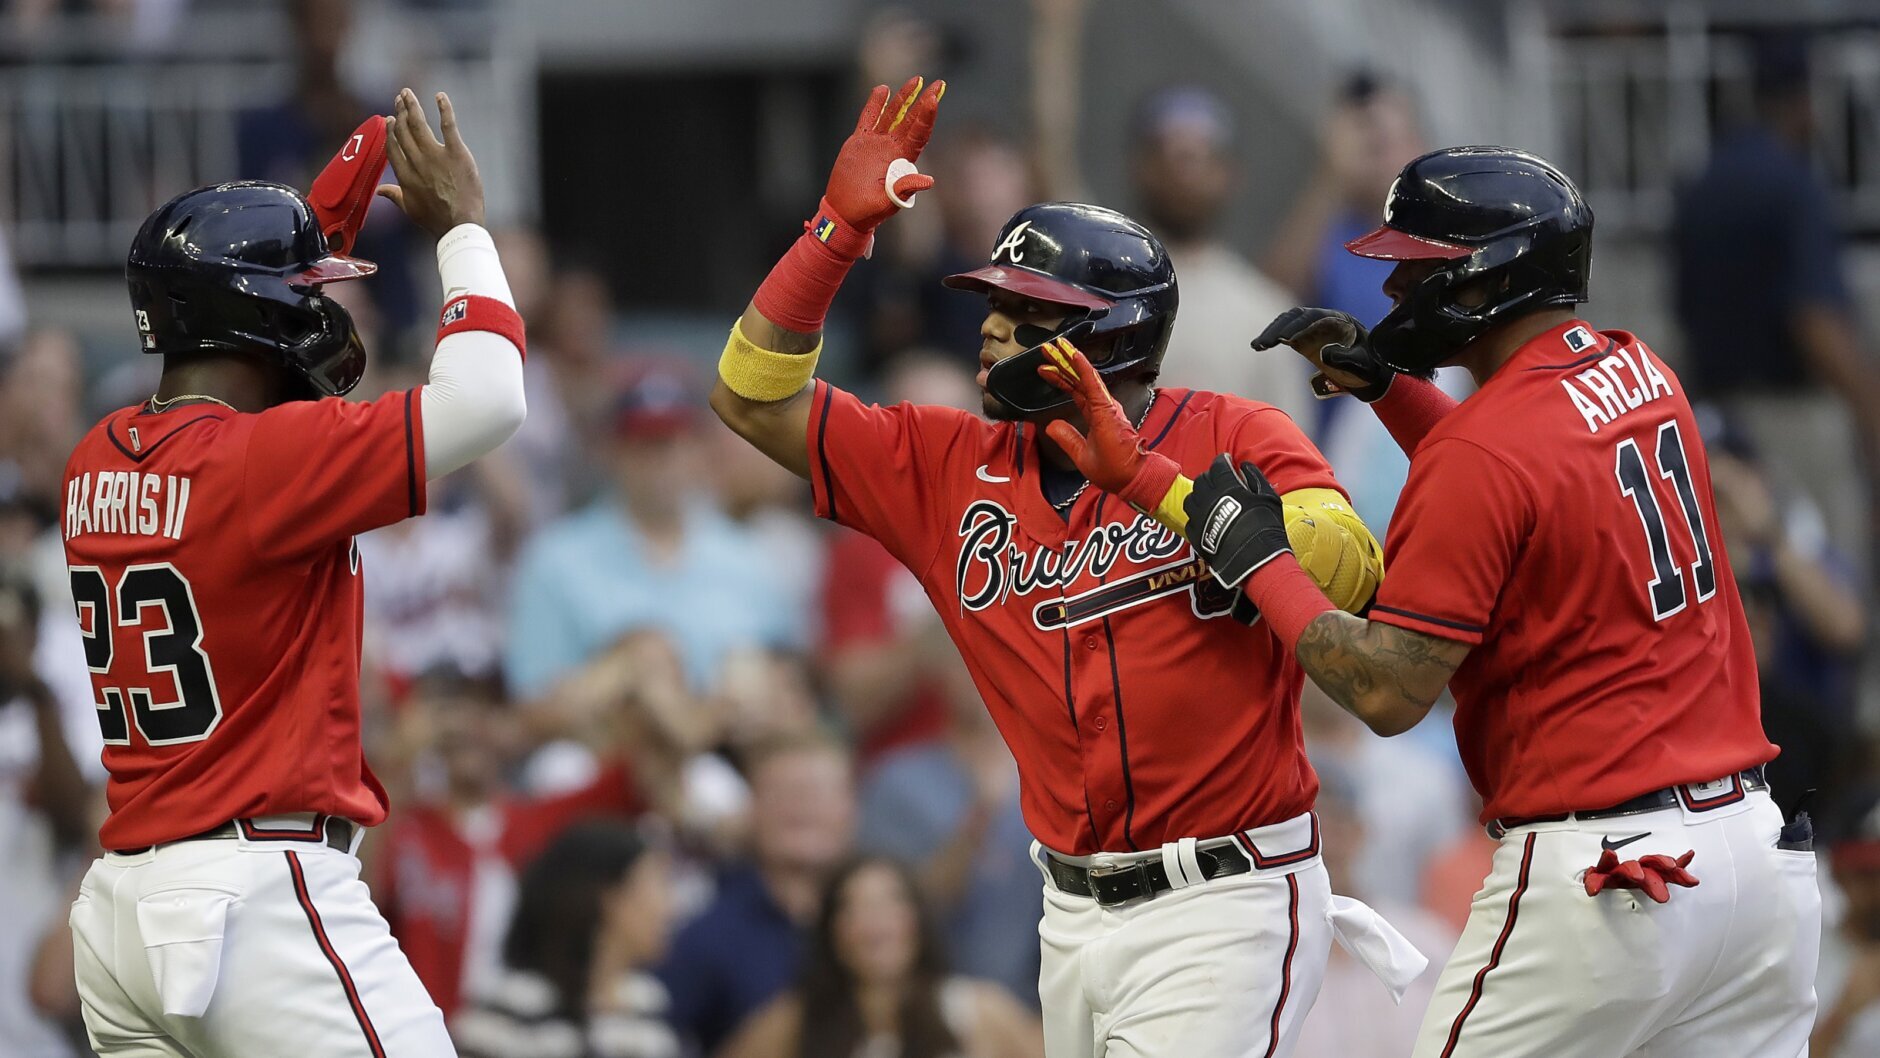 Braves vs. Marlins final score: Elder gives up three homers but Braves earn  thrilling comeback win in eighth, 6-4 - Battery Power